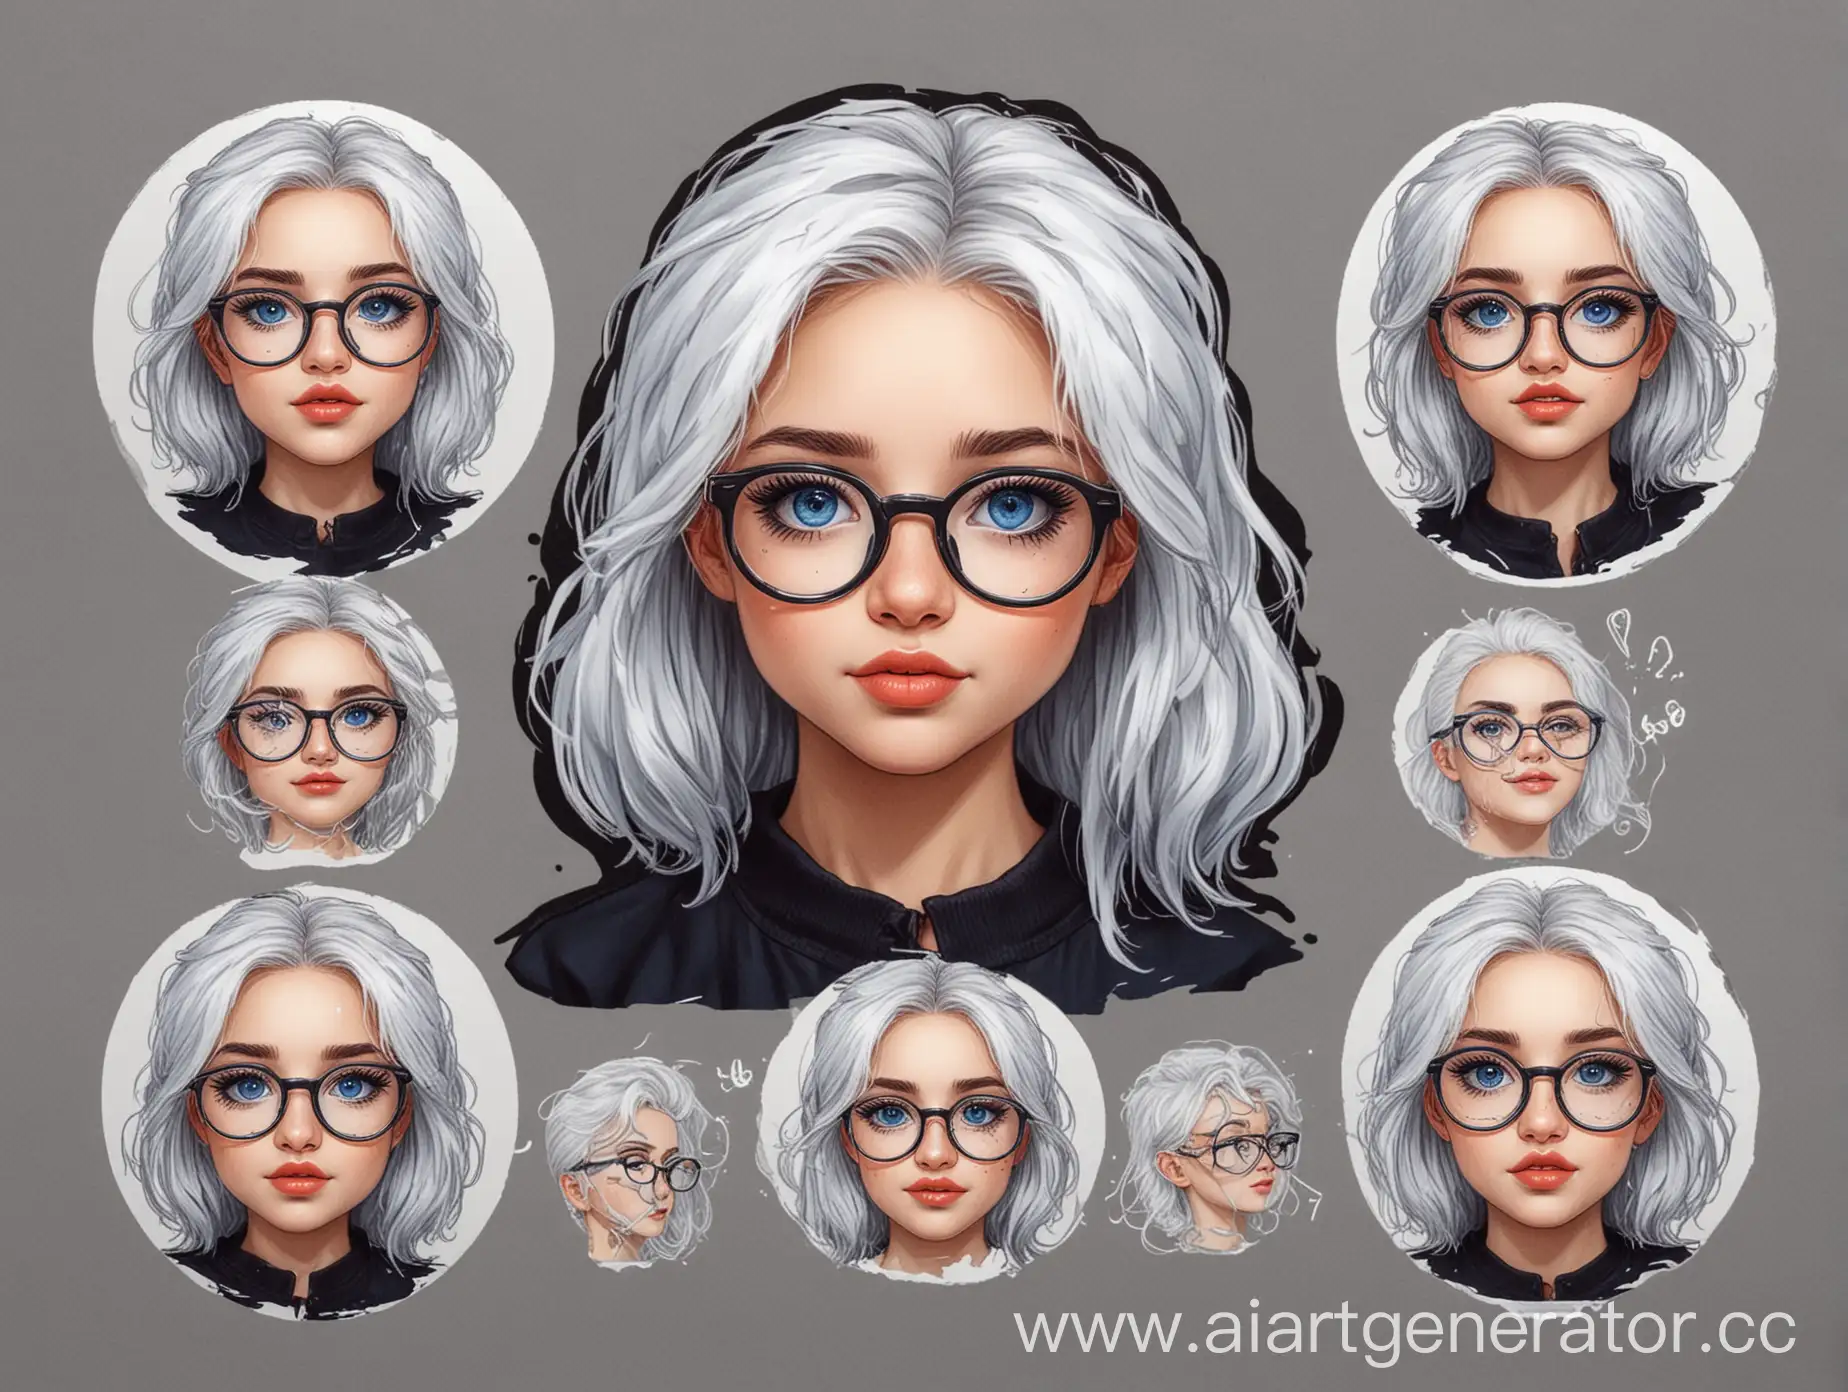 Sticker-Set-Trendy-Young-Woman-with-White-Hair-and-Black-Round-Glasses-in-Various-Poses